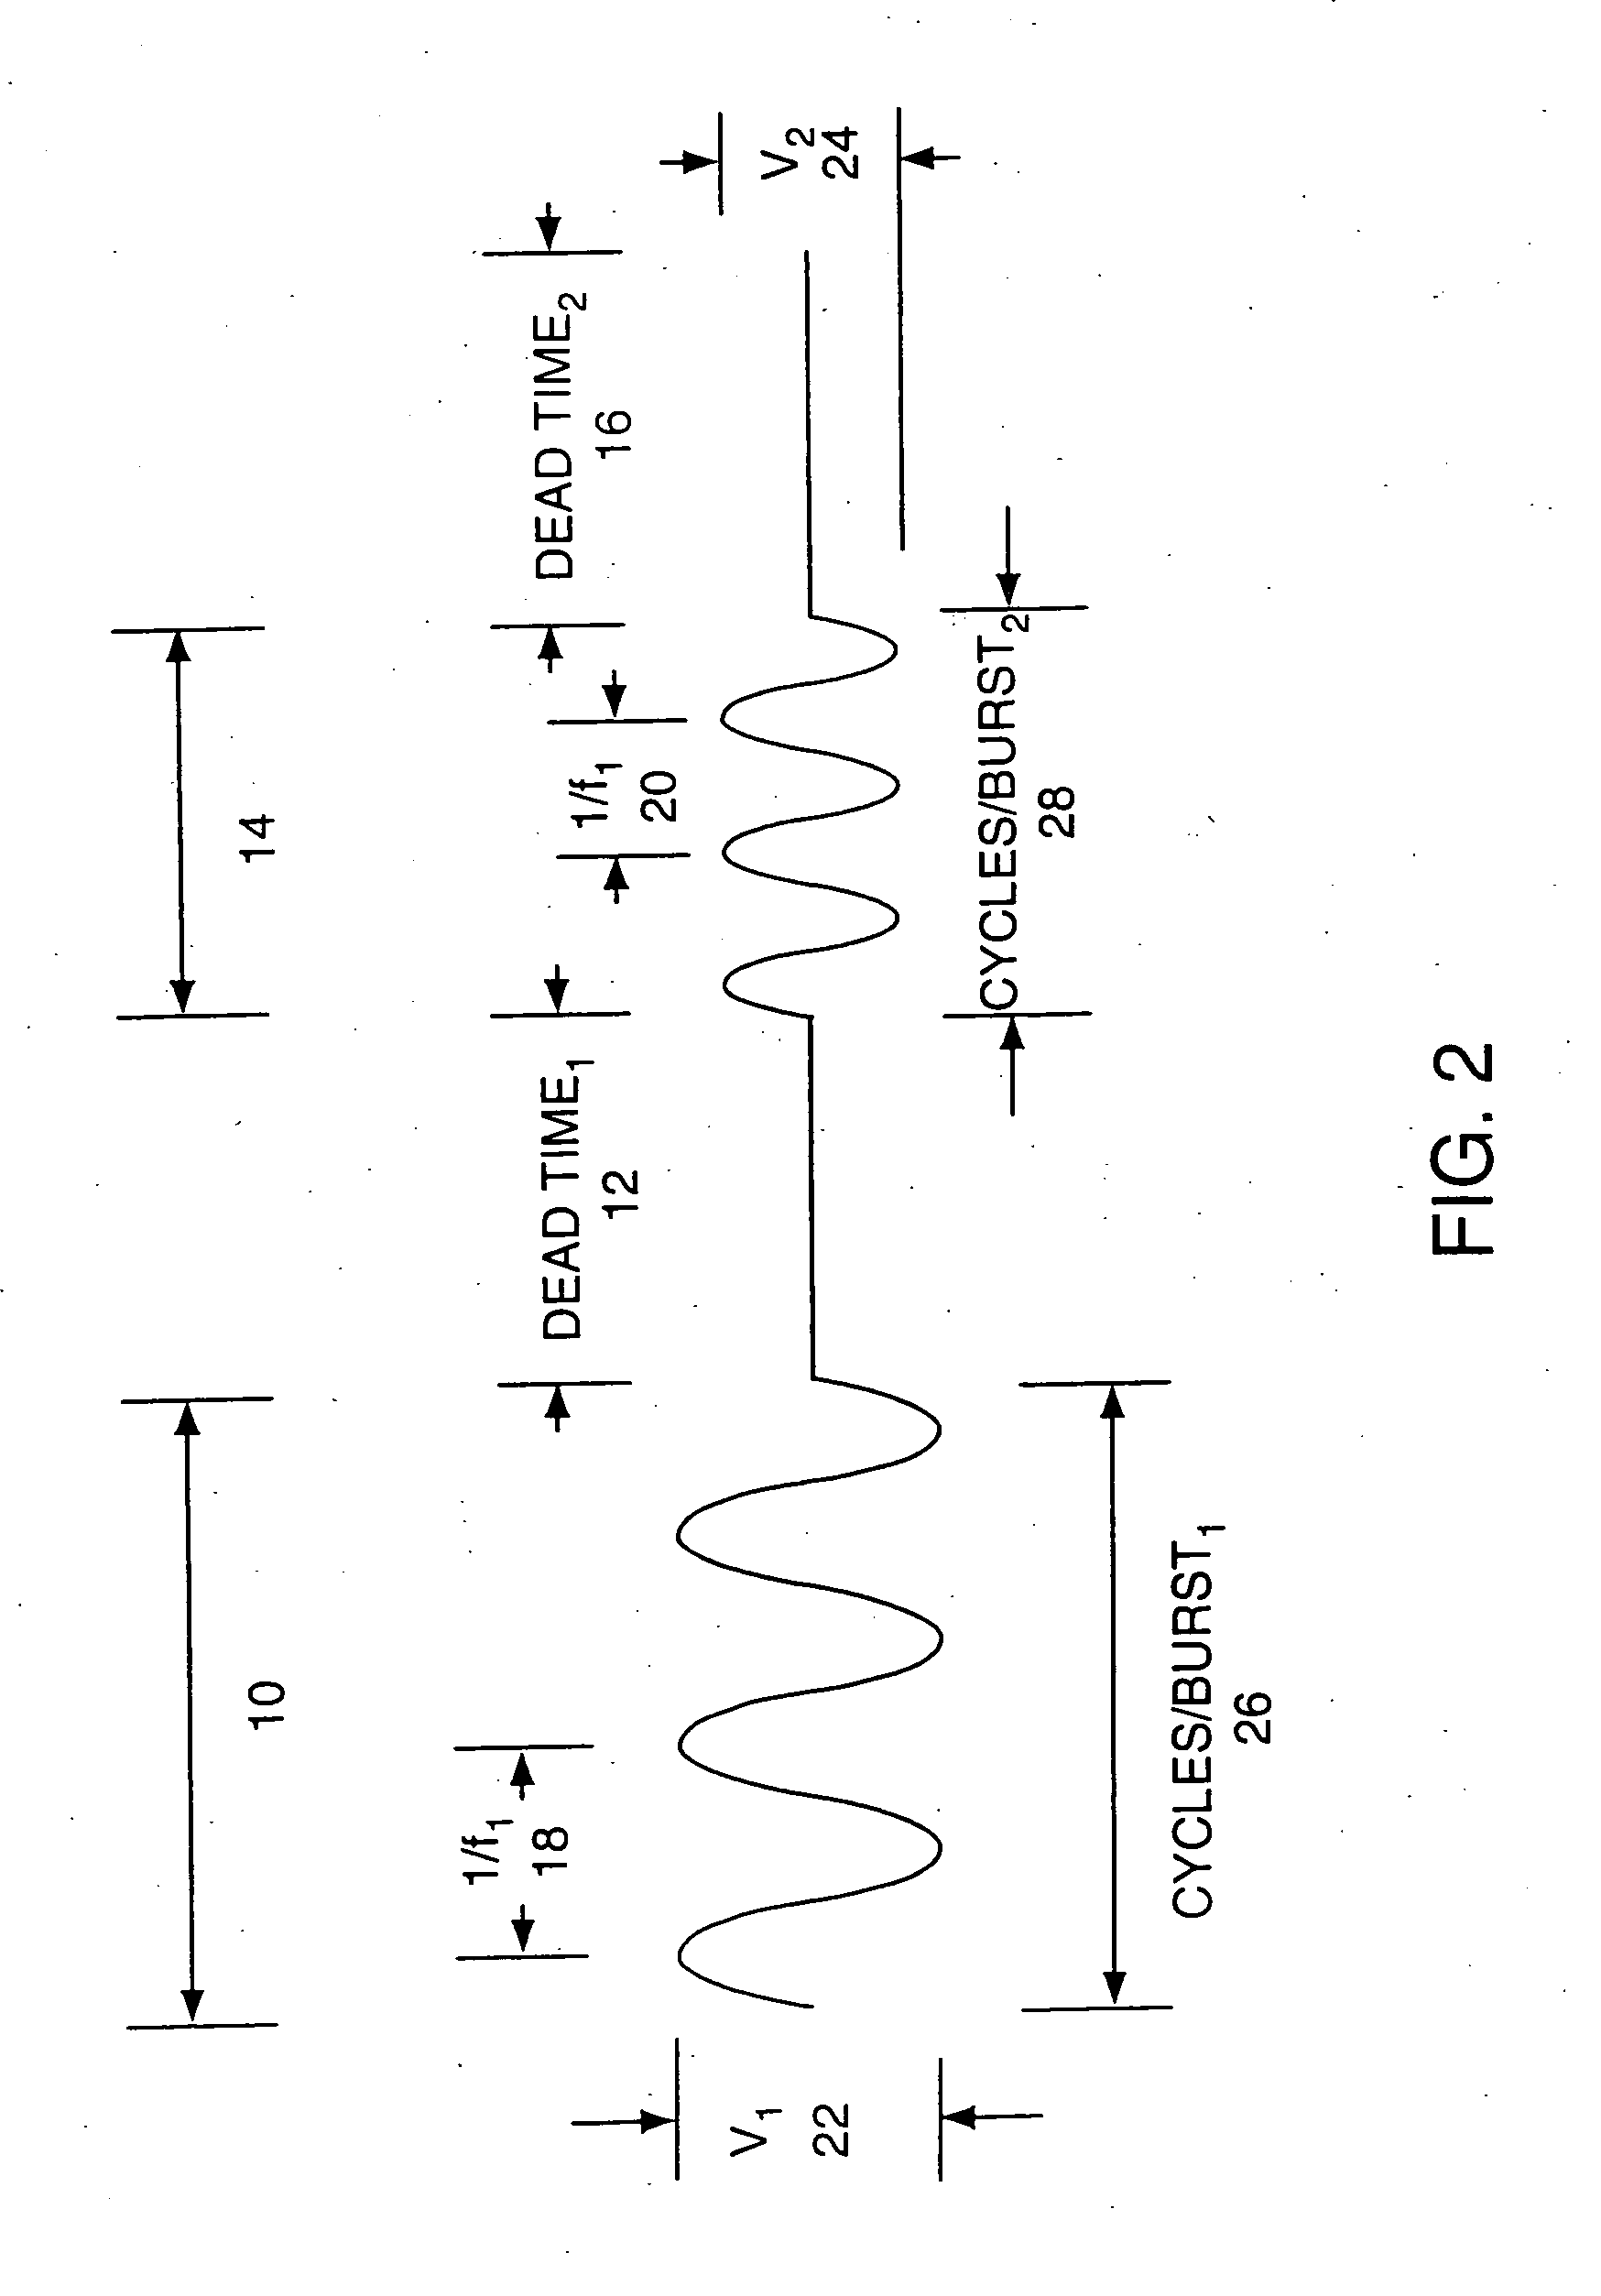 Systems and methods for determining a state of fluidization and/or a state of mixing